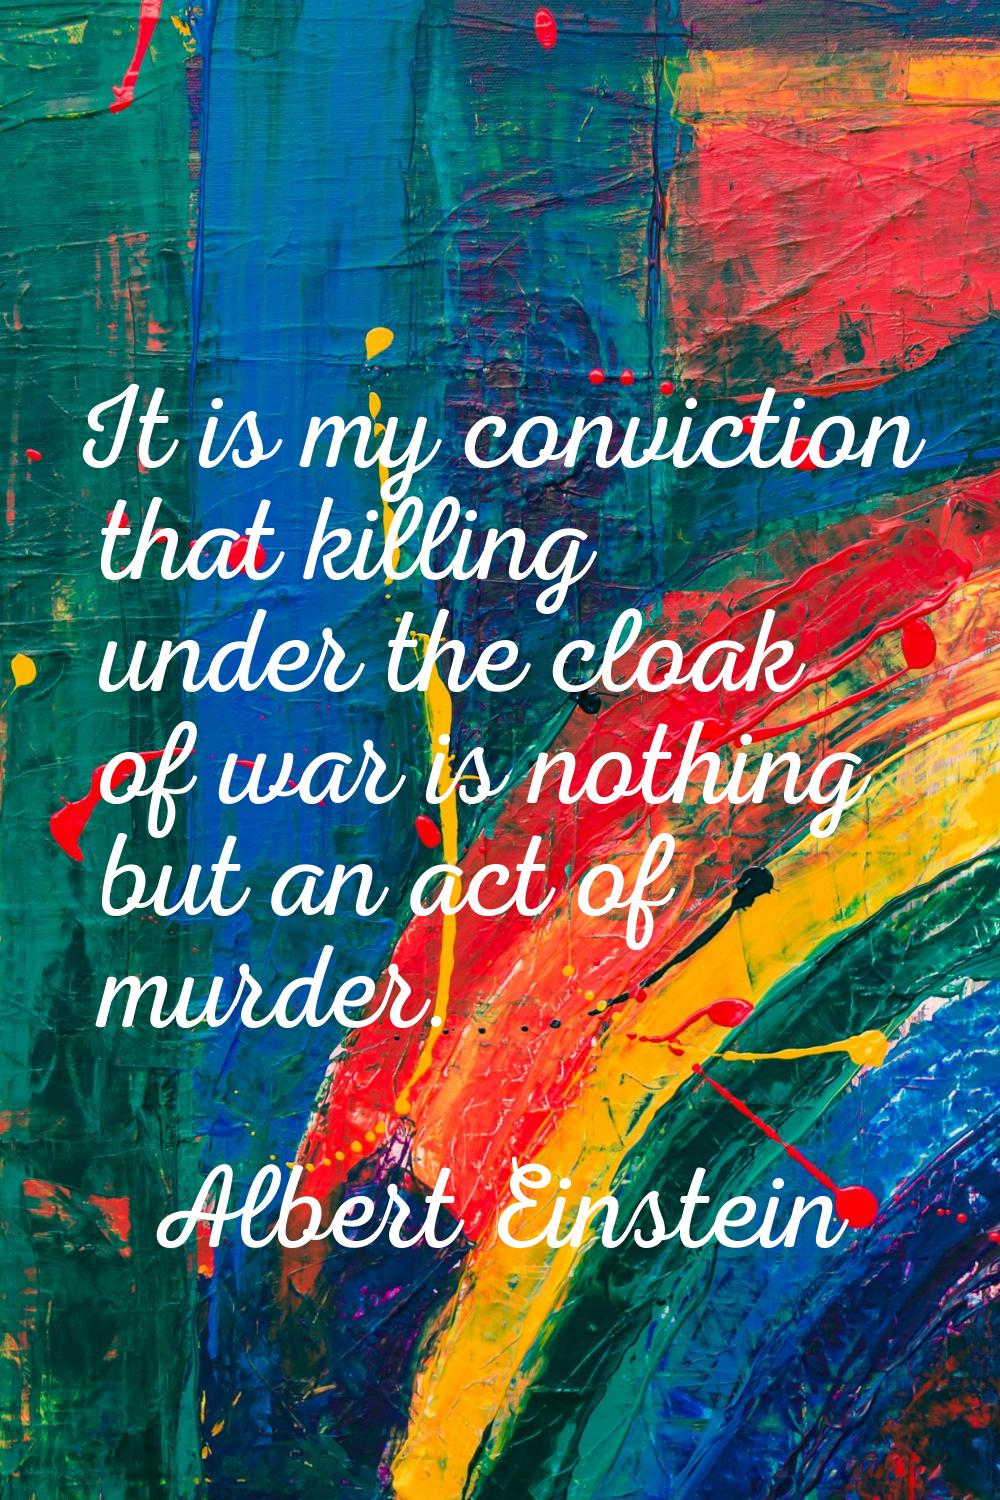 It is my conviction that killing under the cloak of war is nothing but an act of murder.